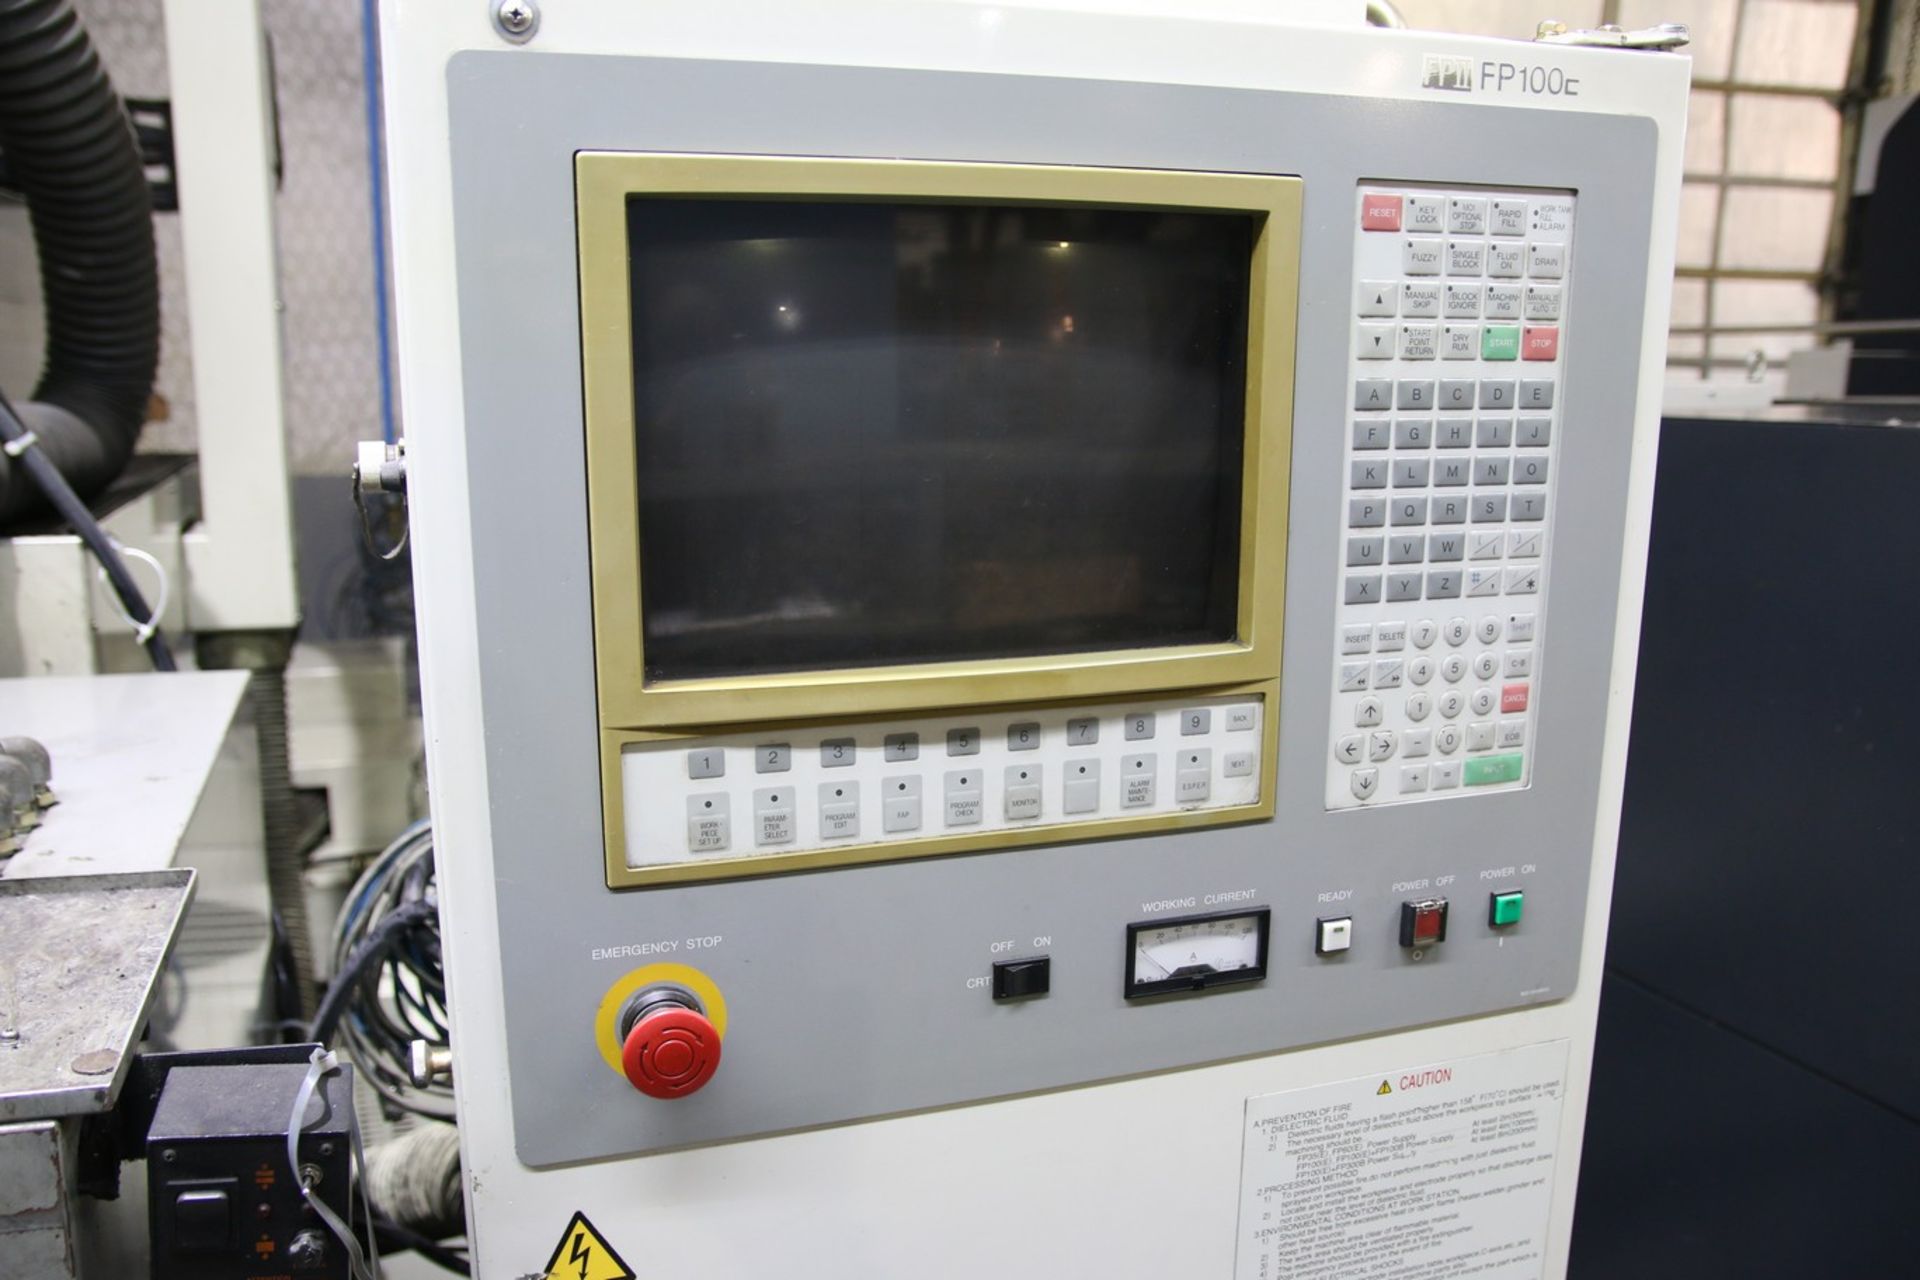 1999 Mitsubishi EX30 Mitsubishi EX30 EDM Machine with Robot 28" x 40" Table, with System 3R - Image 16 of 16